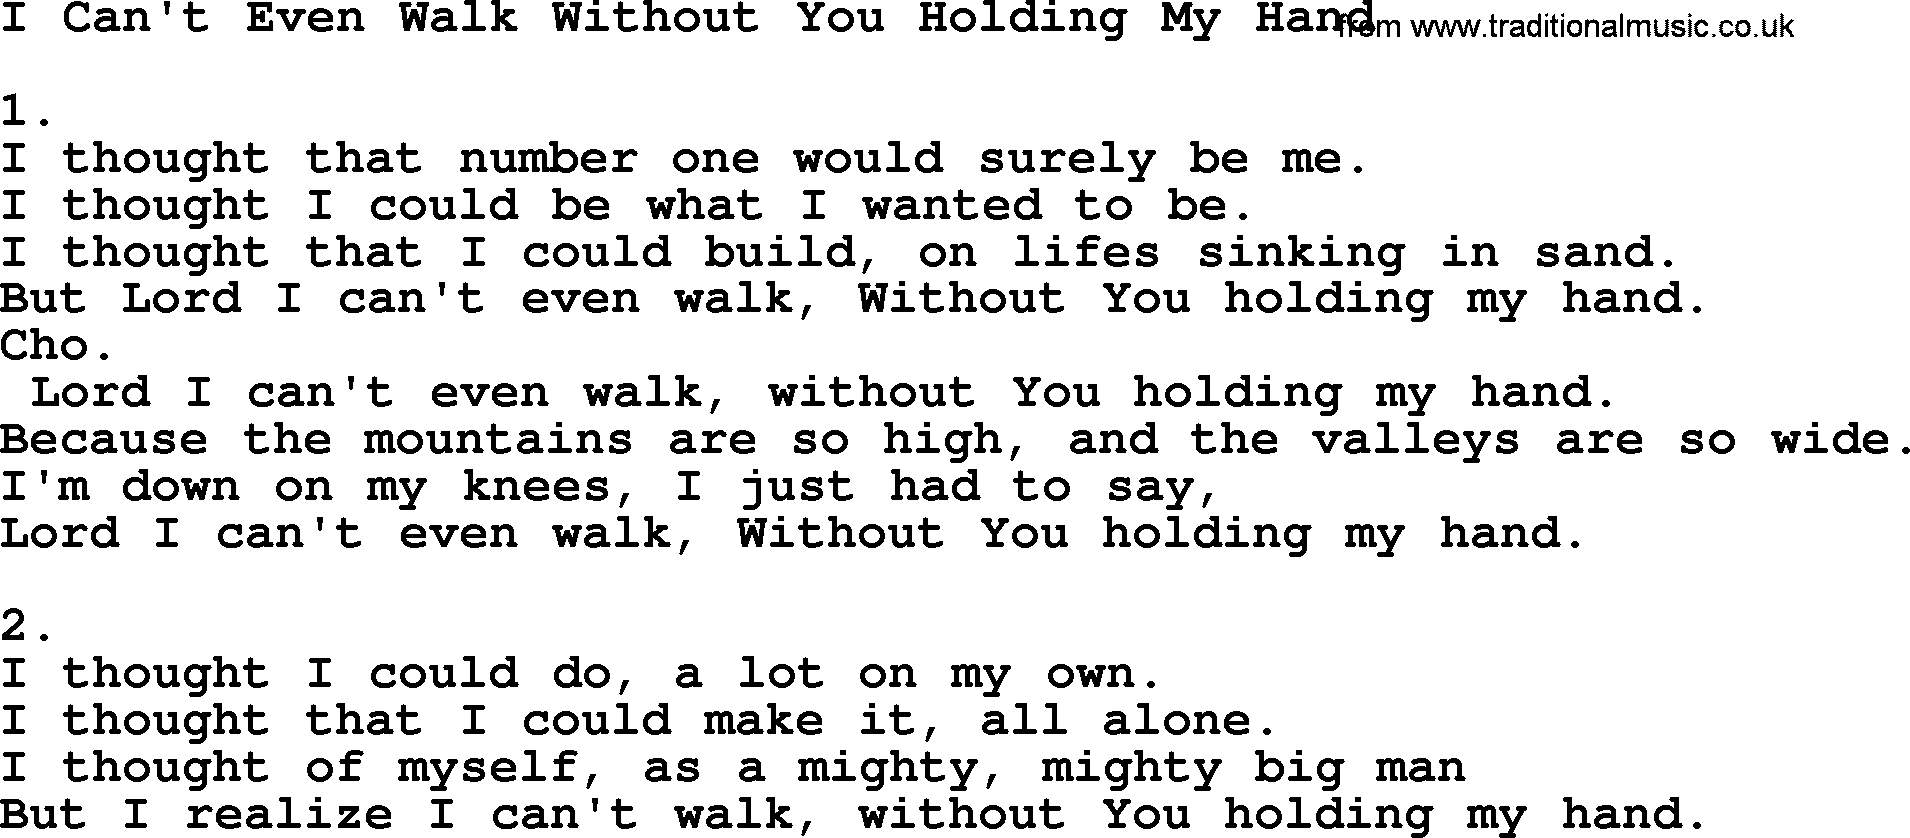 Apostolic & Pentecostal Hymns and Songs, Hymn: I Can't Even Walk Without You Holding My Hand lyrics and PDF